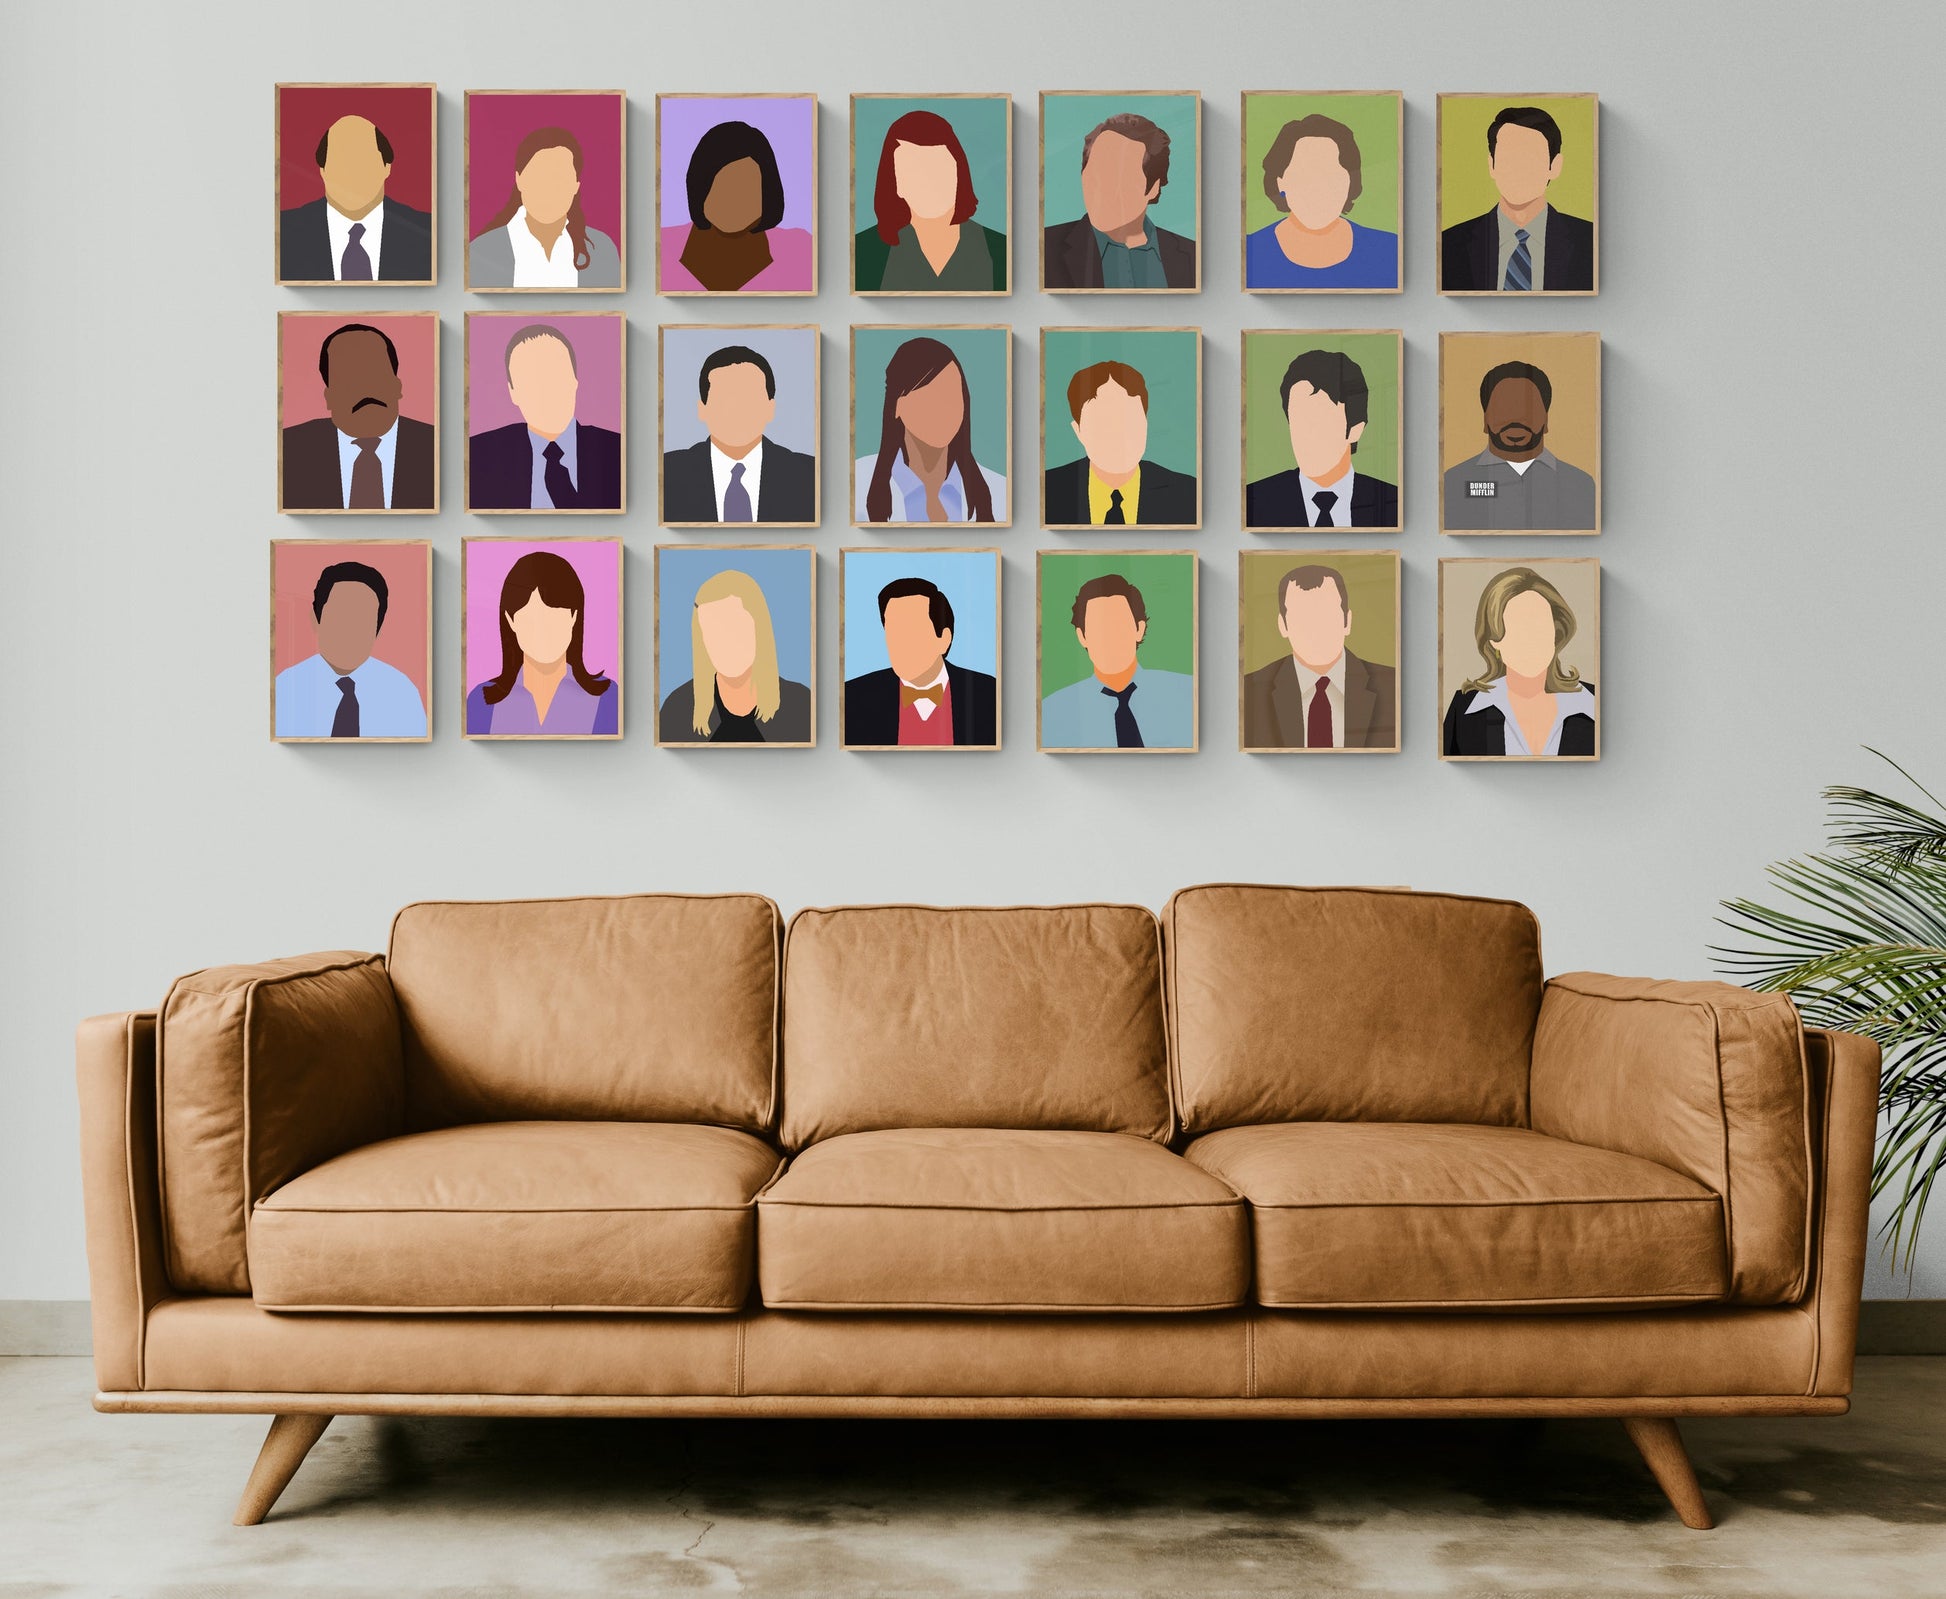 Minimal Portrait Set of The Office tv show Characters featuring Michael Scott, Dwight Schrute, Jim Halpert, Pam Beesy, and the full 21 set of characters